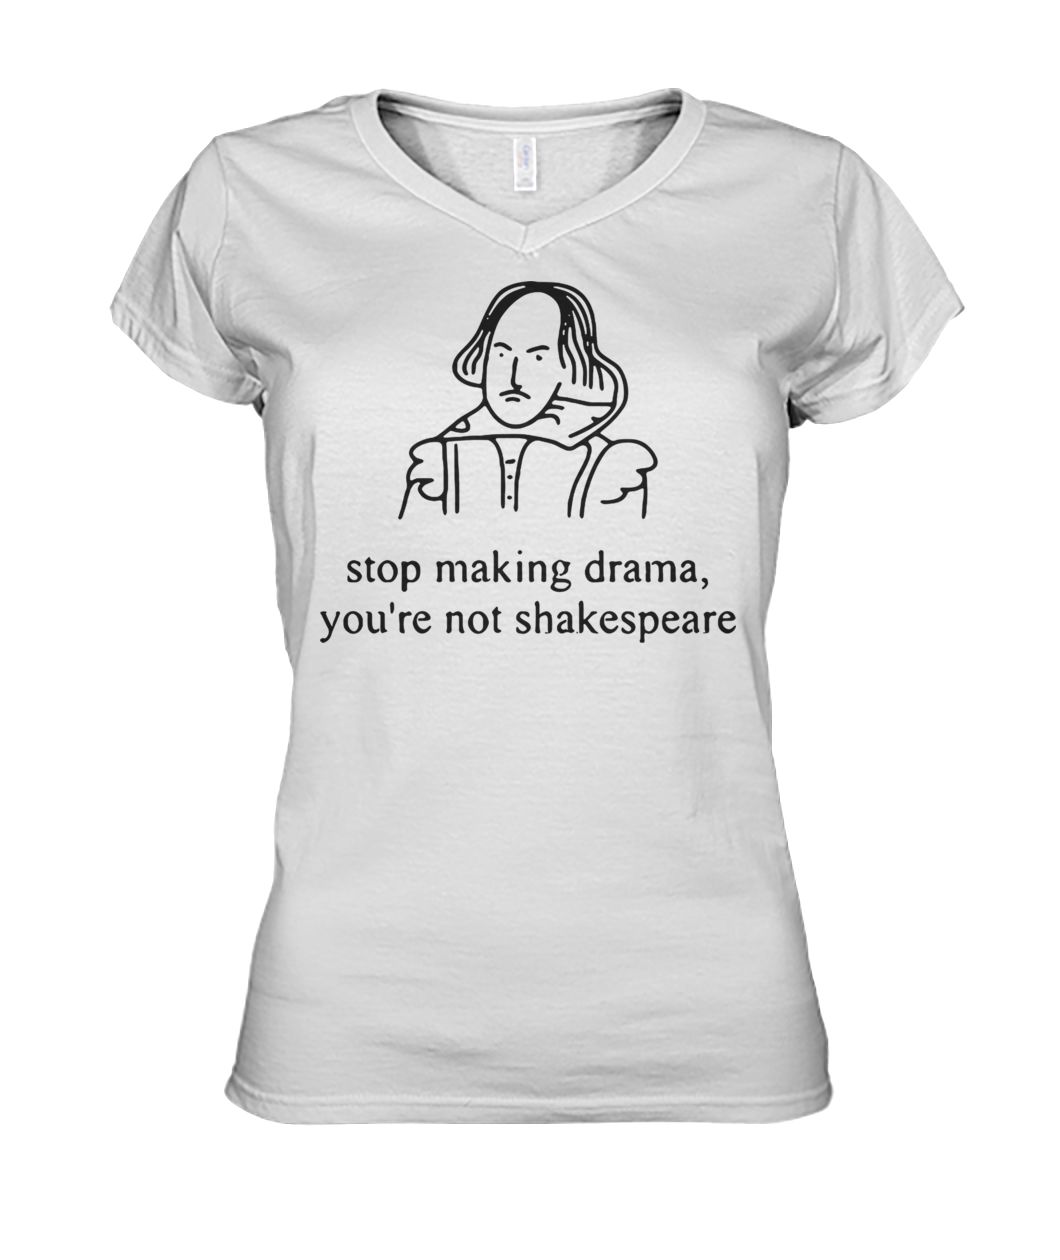 Stop making drama you're not shakespeare women's v-neck